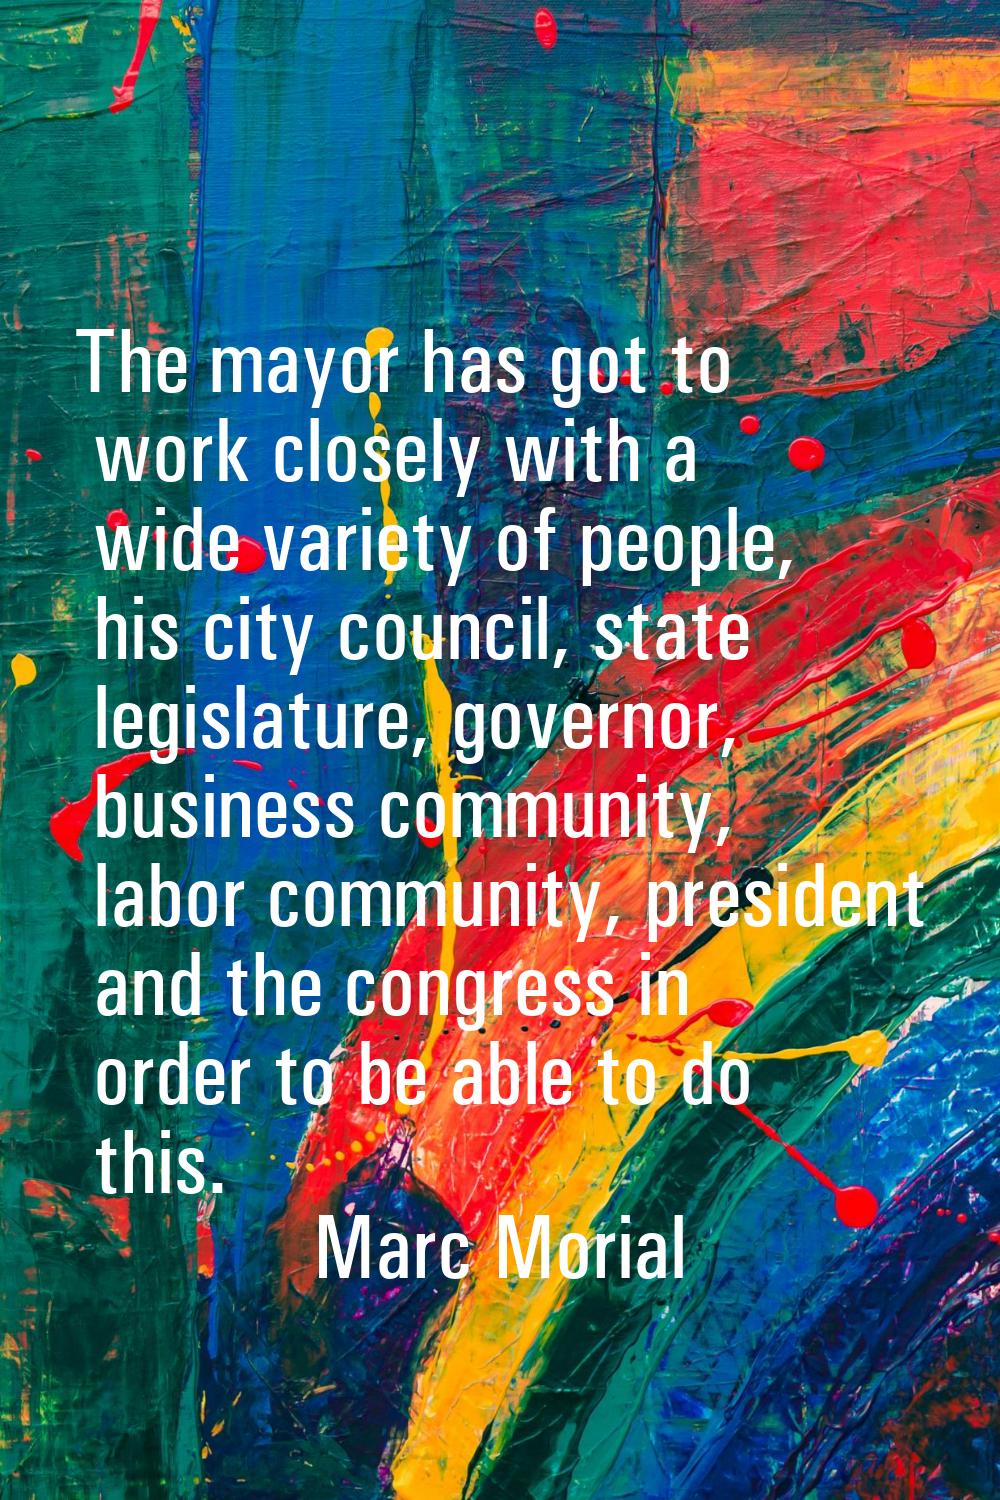 The mayor has got to work closely with a wide variety of people, his city council, state legislatur